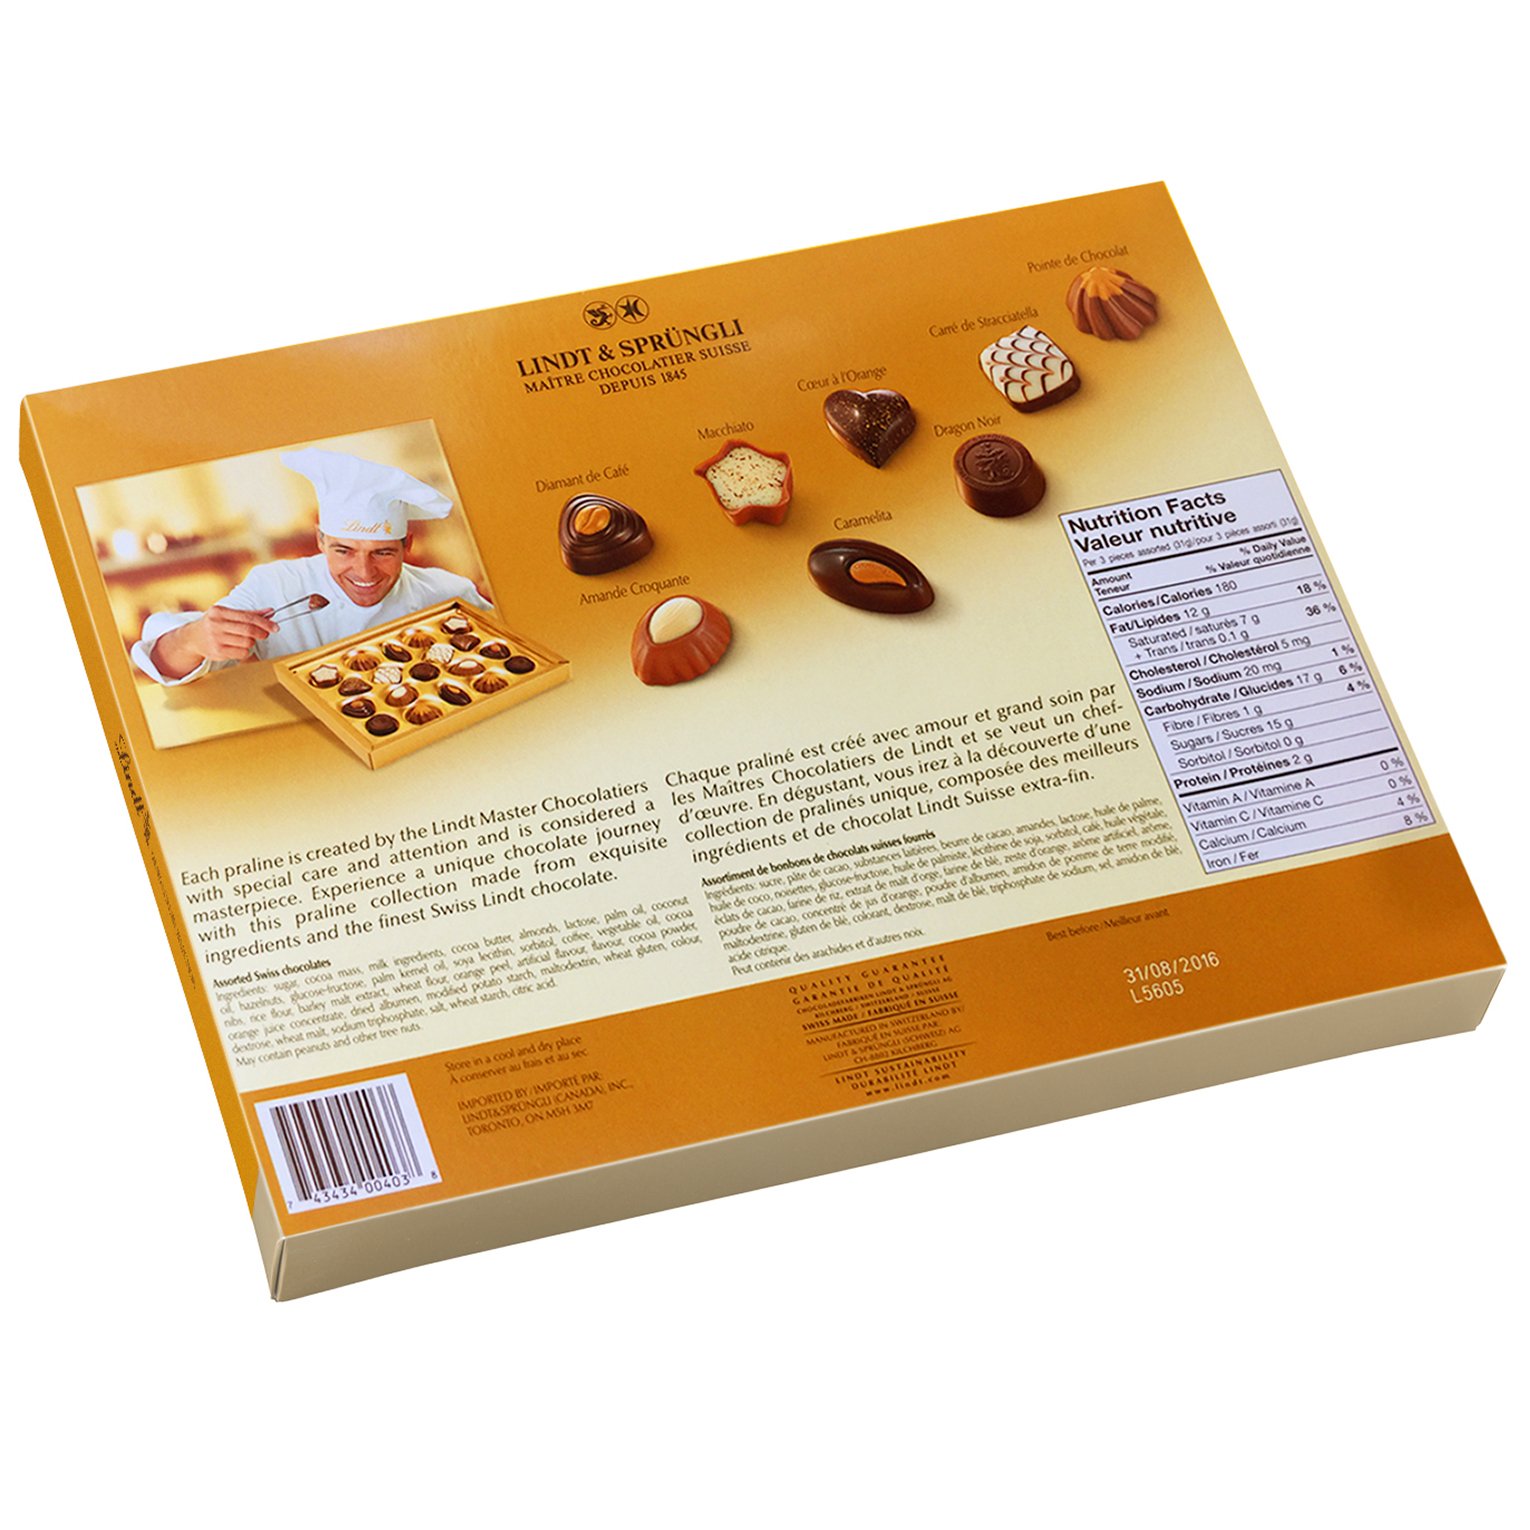 Secondery Lindt-Swiss-Luxury-Selection-Chocolate-Box-195g-back.jpg